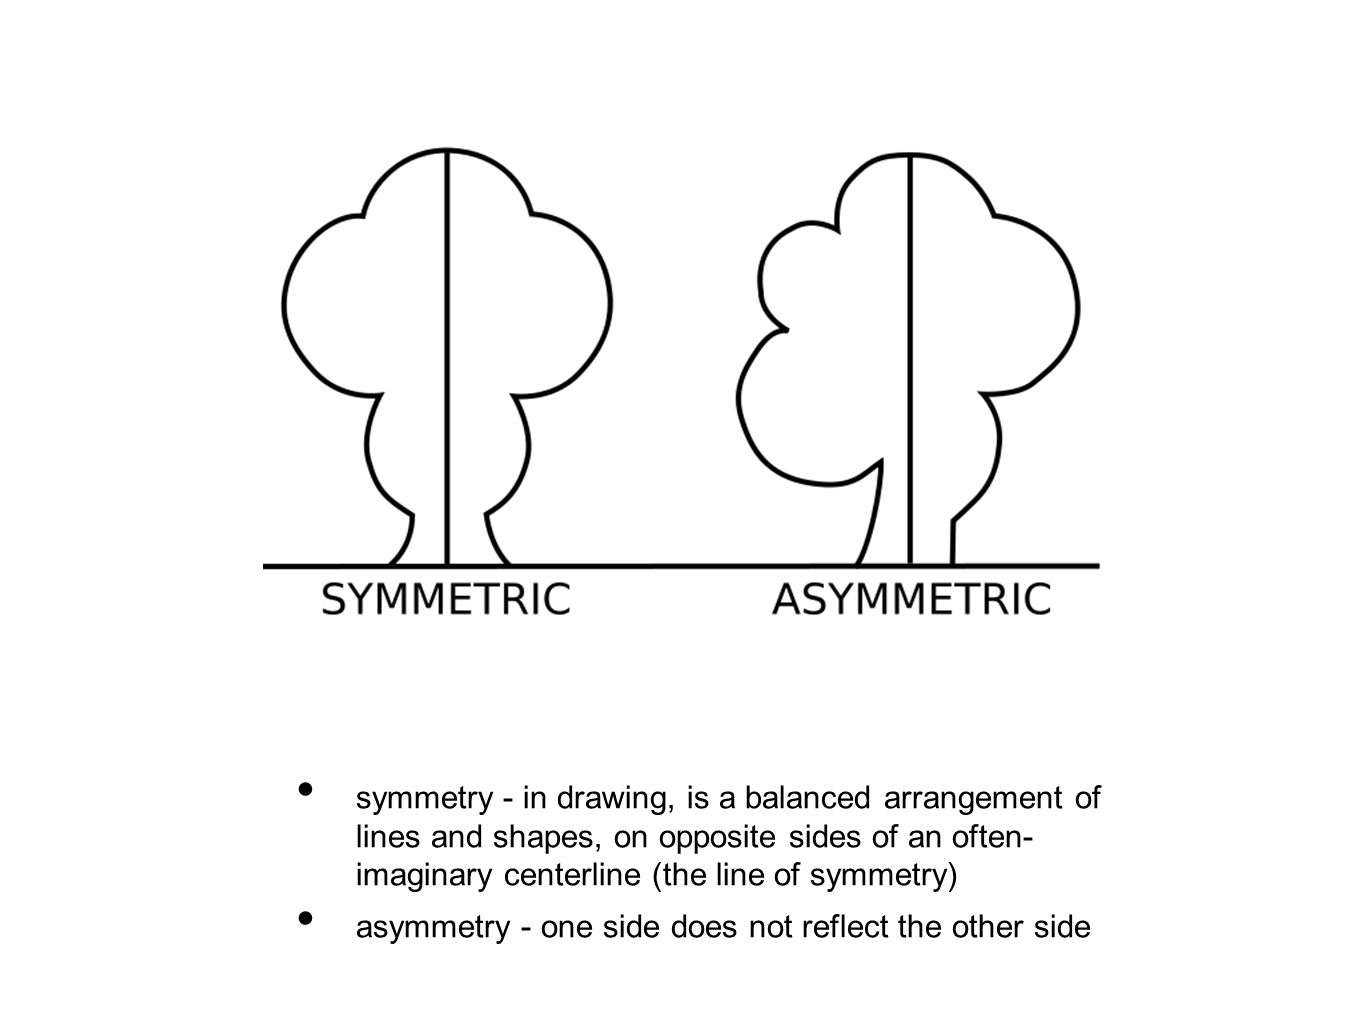 symmetry - in drawing, is a balanced arrangement of lines and shapes, on opposite sides of an often- imaginary centerline (the line of symmetry)